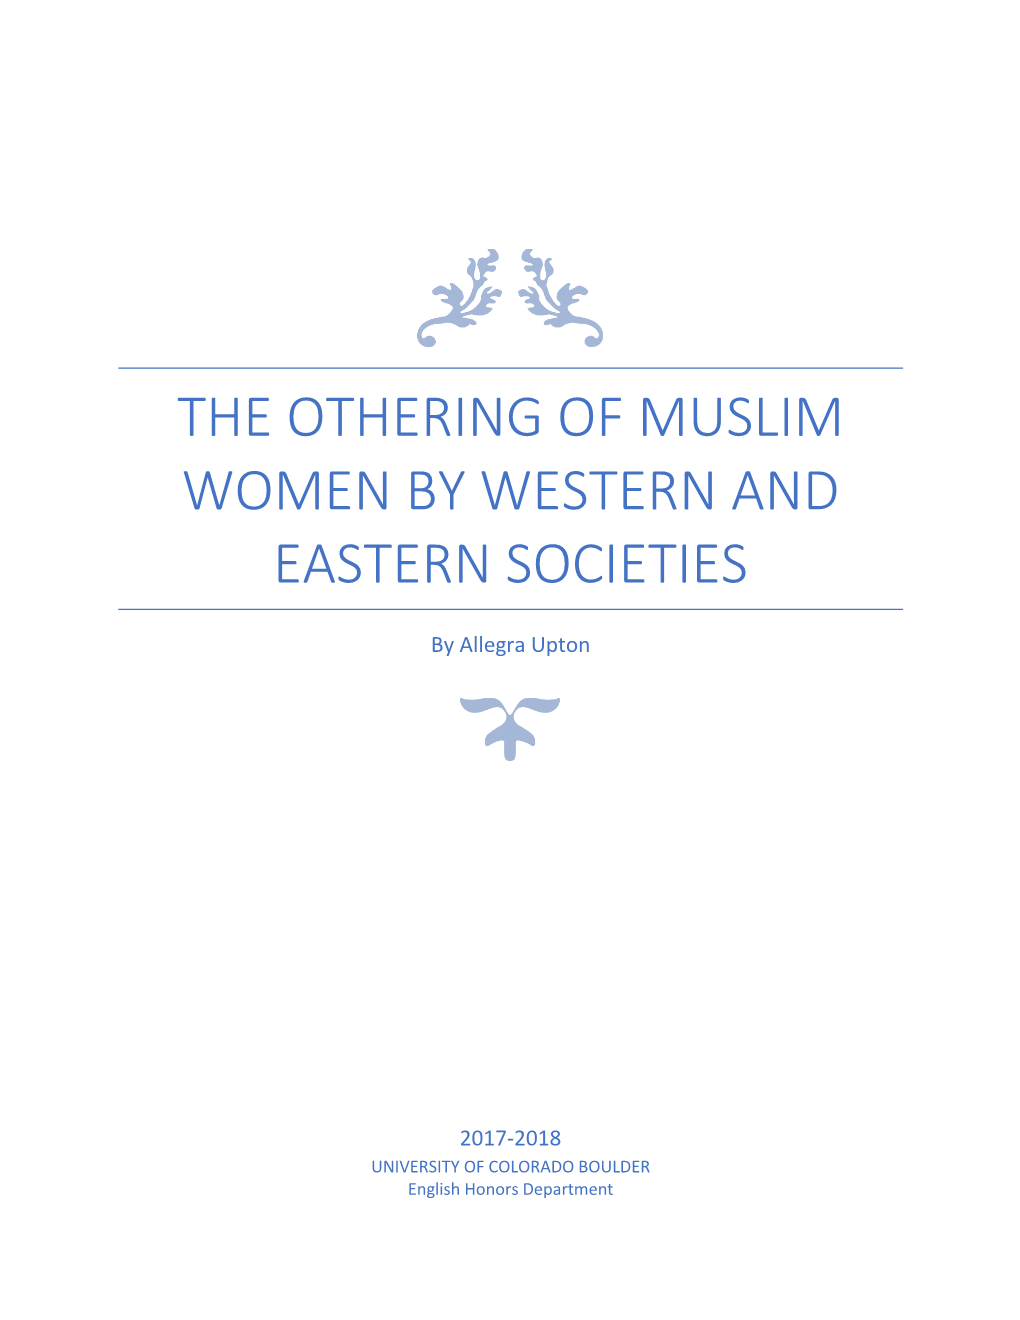 The Othering of Muslim Women by Western and Eastern Societies